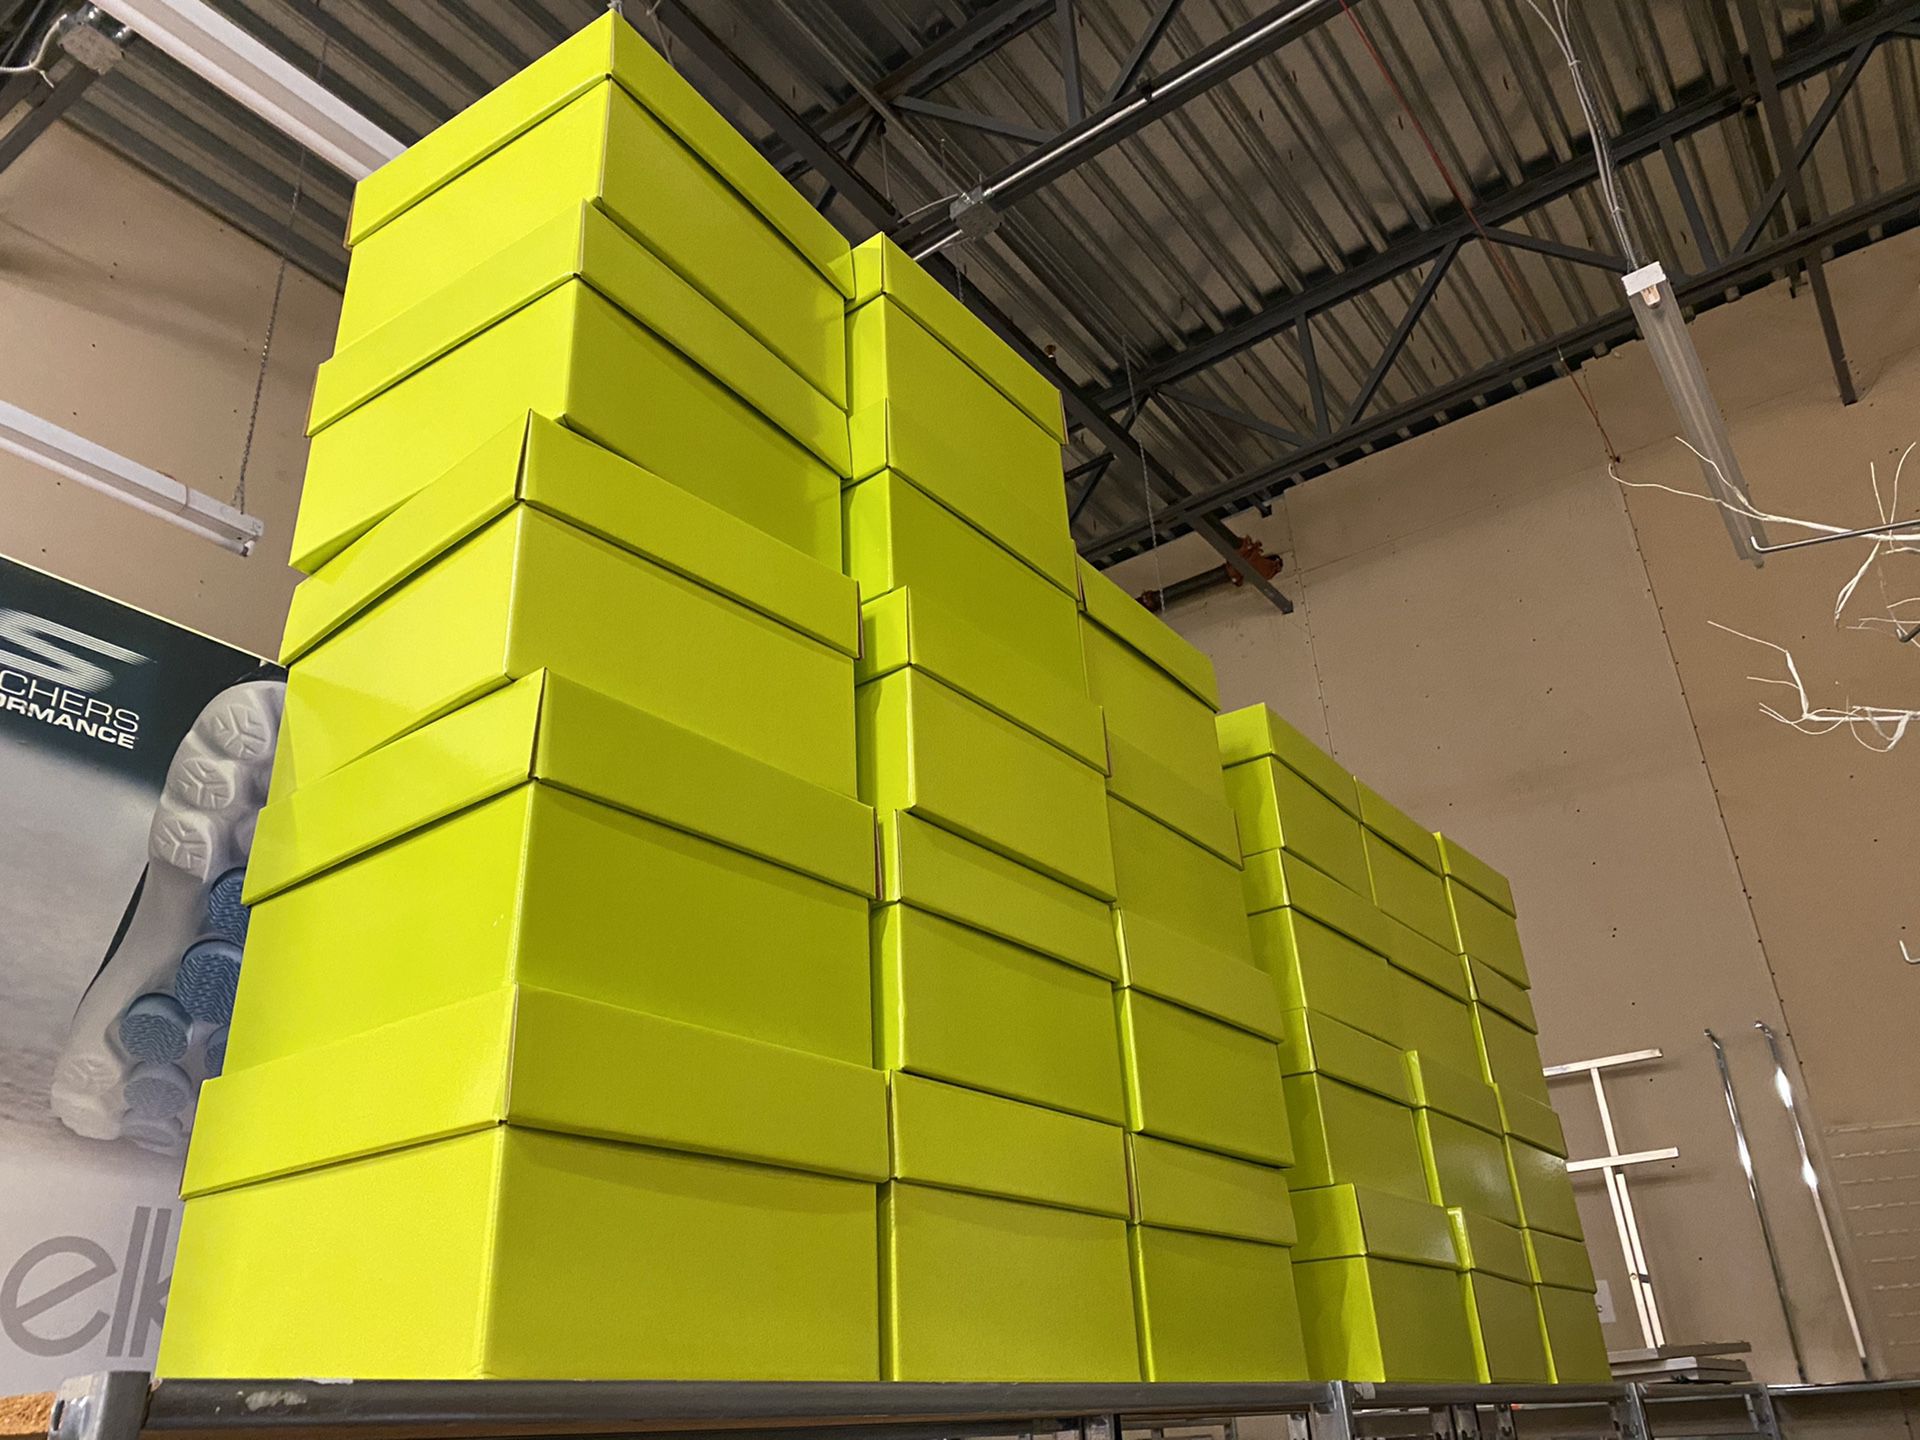 Lime green gift boxes